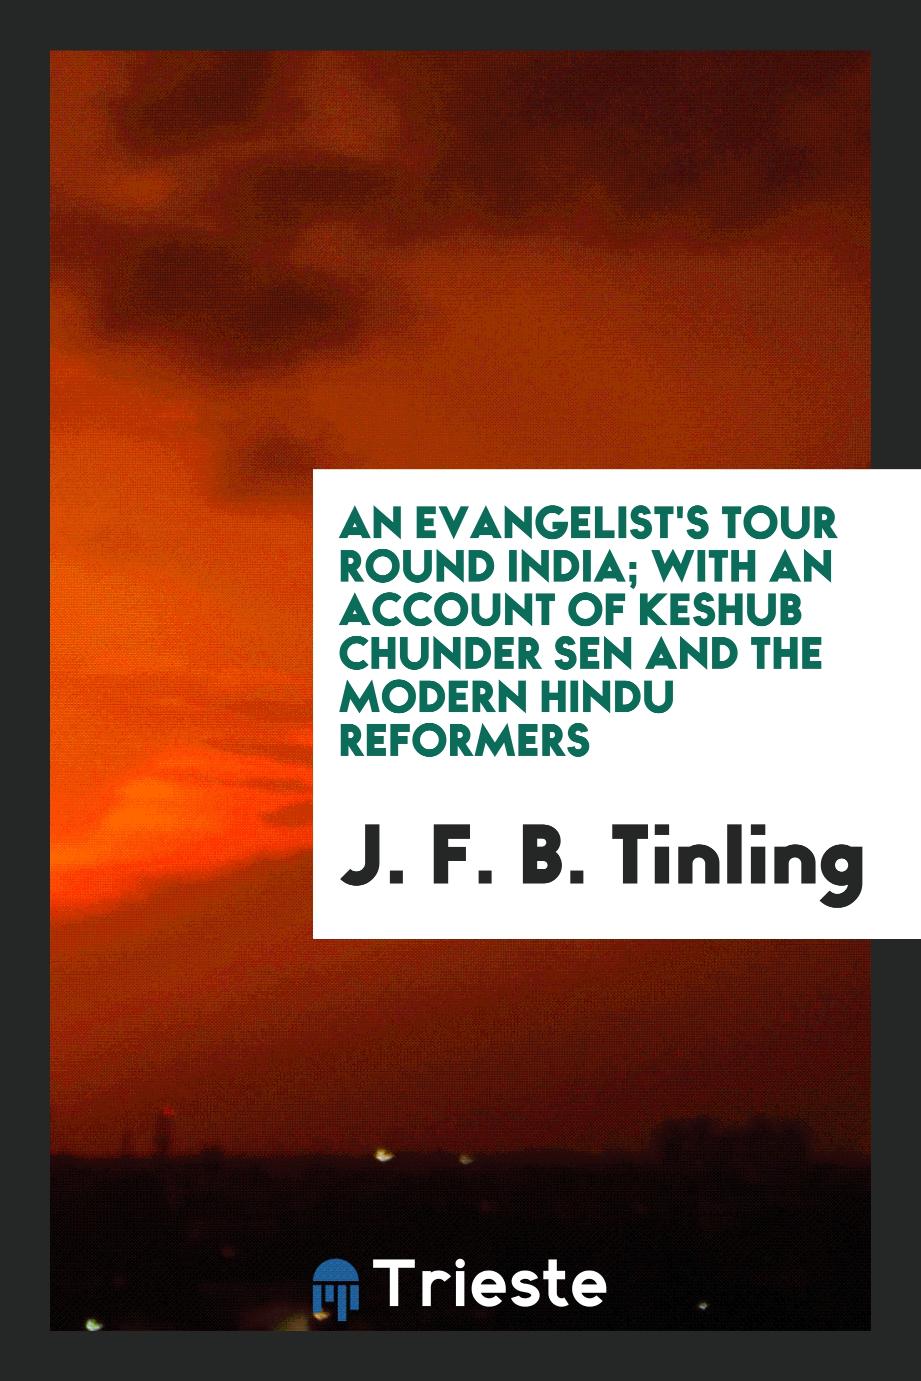 An Evangelist's Tour Round India; With an Account of Keshub Chunder Sen and the Modern Hindu Reformers